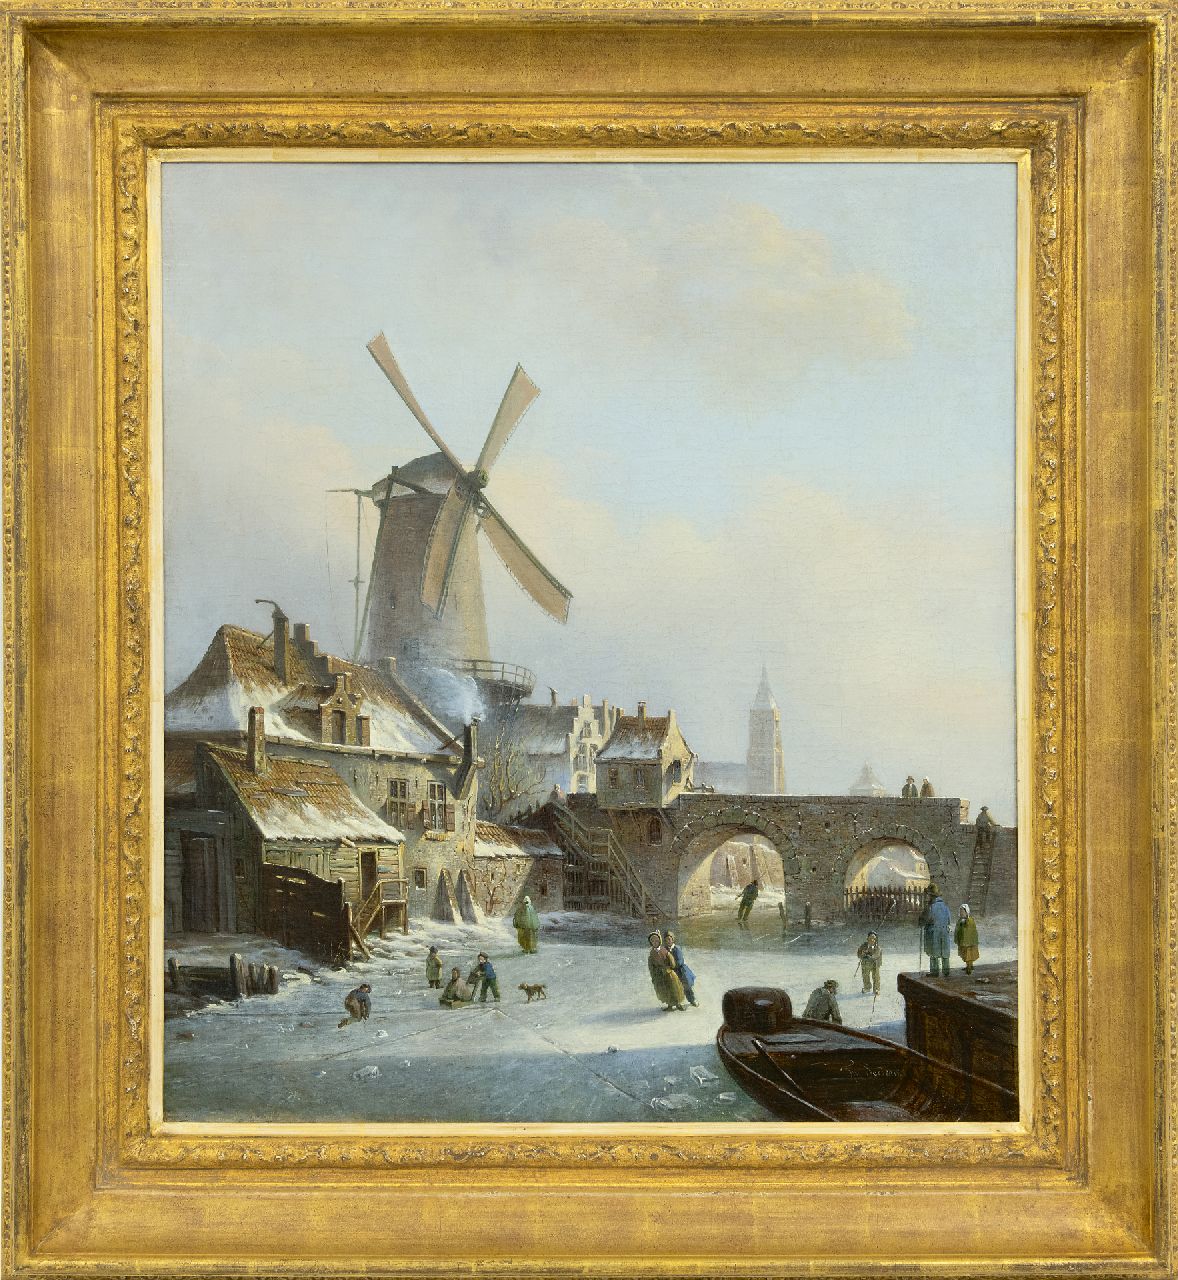 Soeterik T.  | Theodoor Soeterik, Skaters on a frozen outer canal near a mill, oil on canvas 67.0 x 59.7 cm, signed l.r.